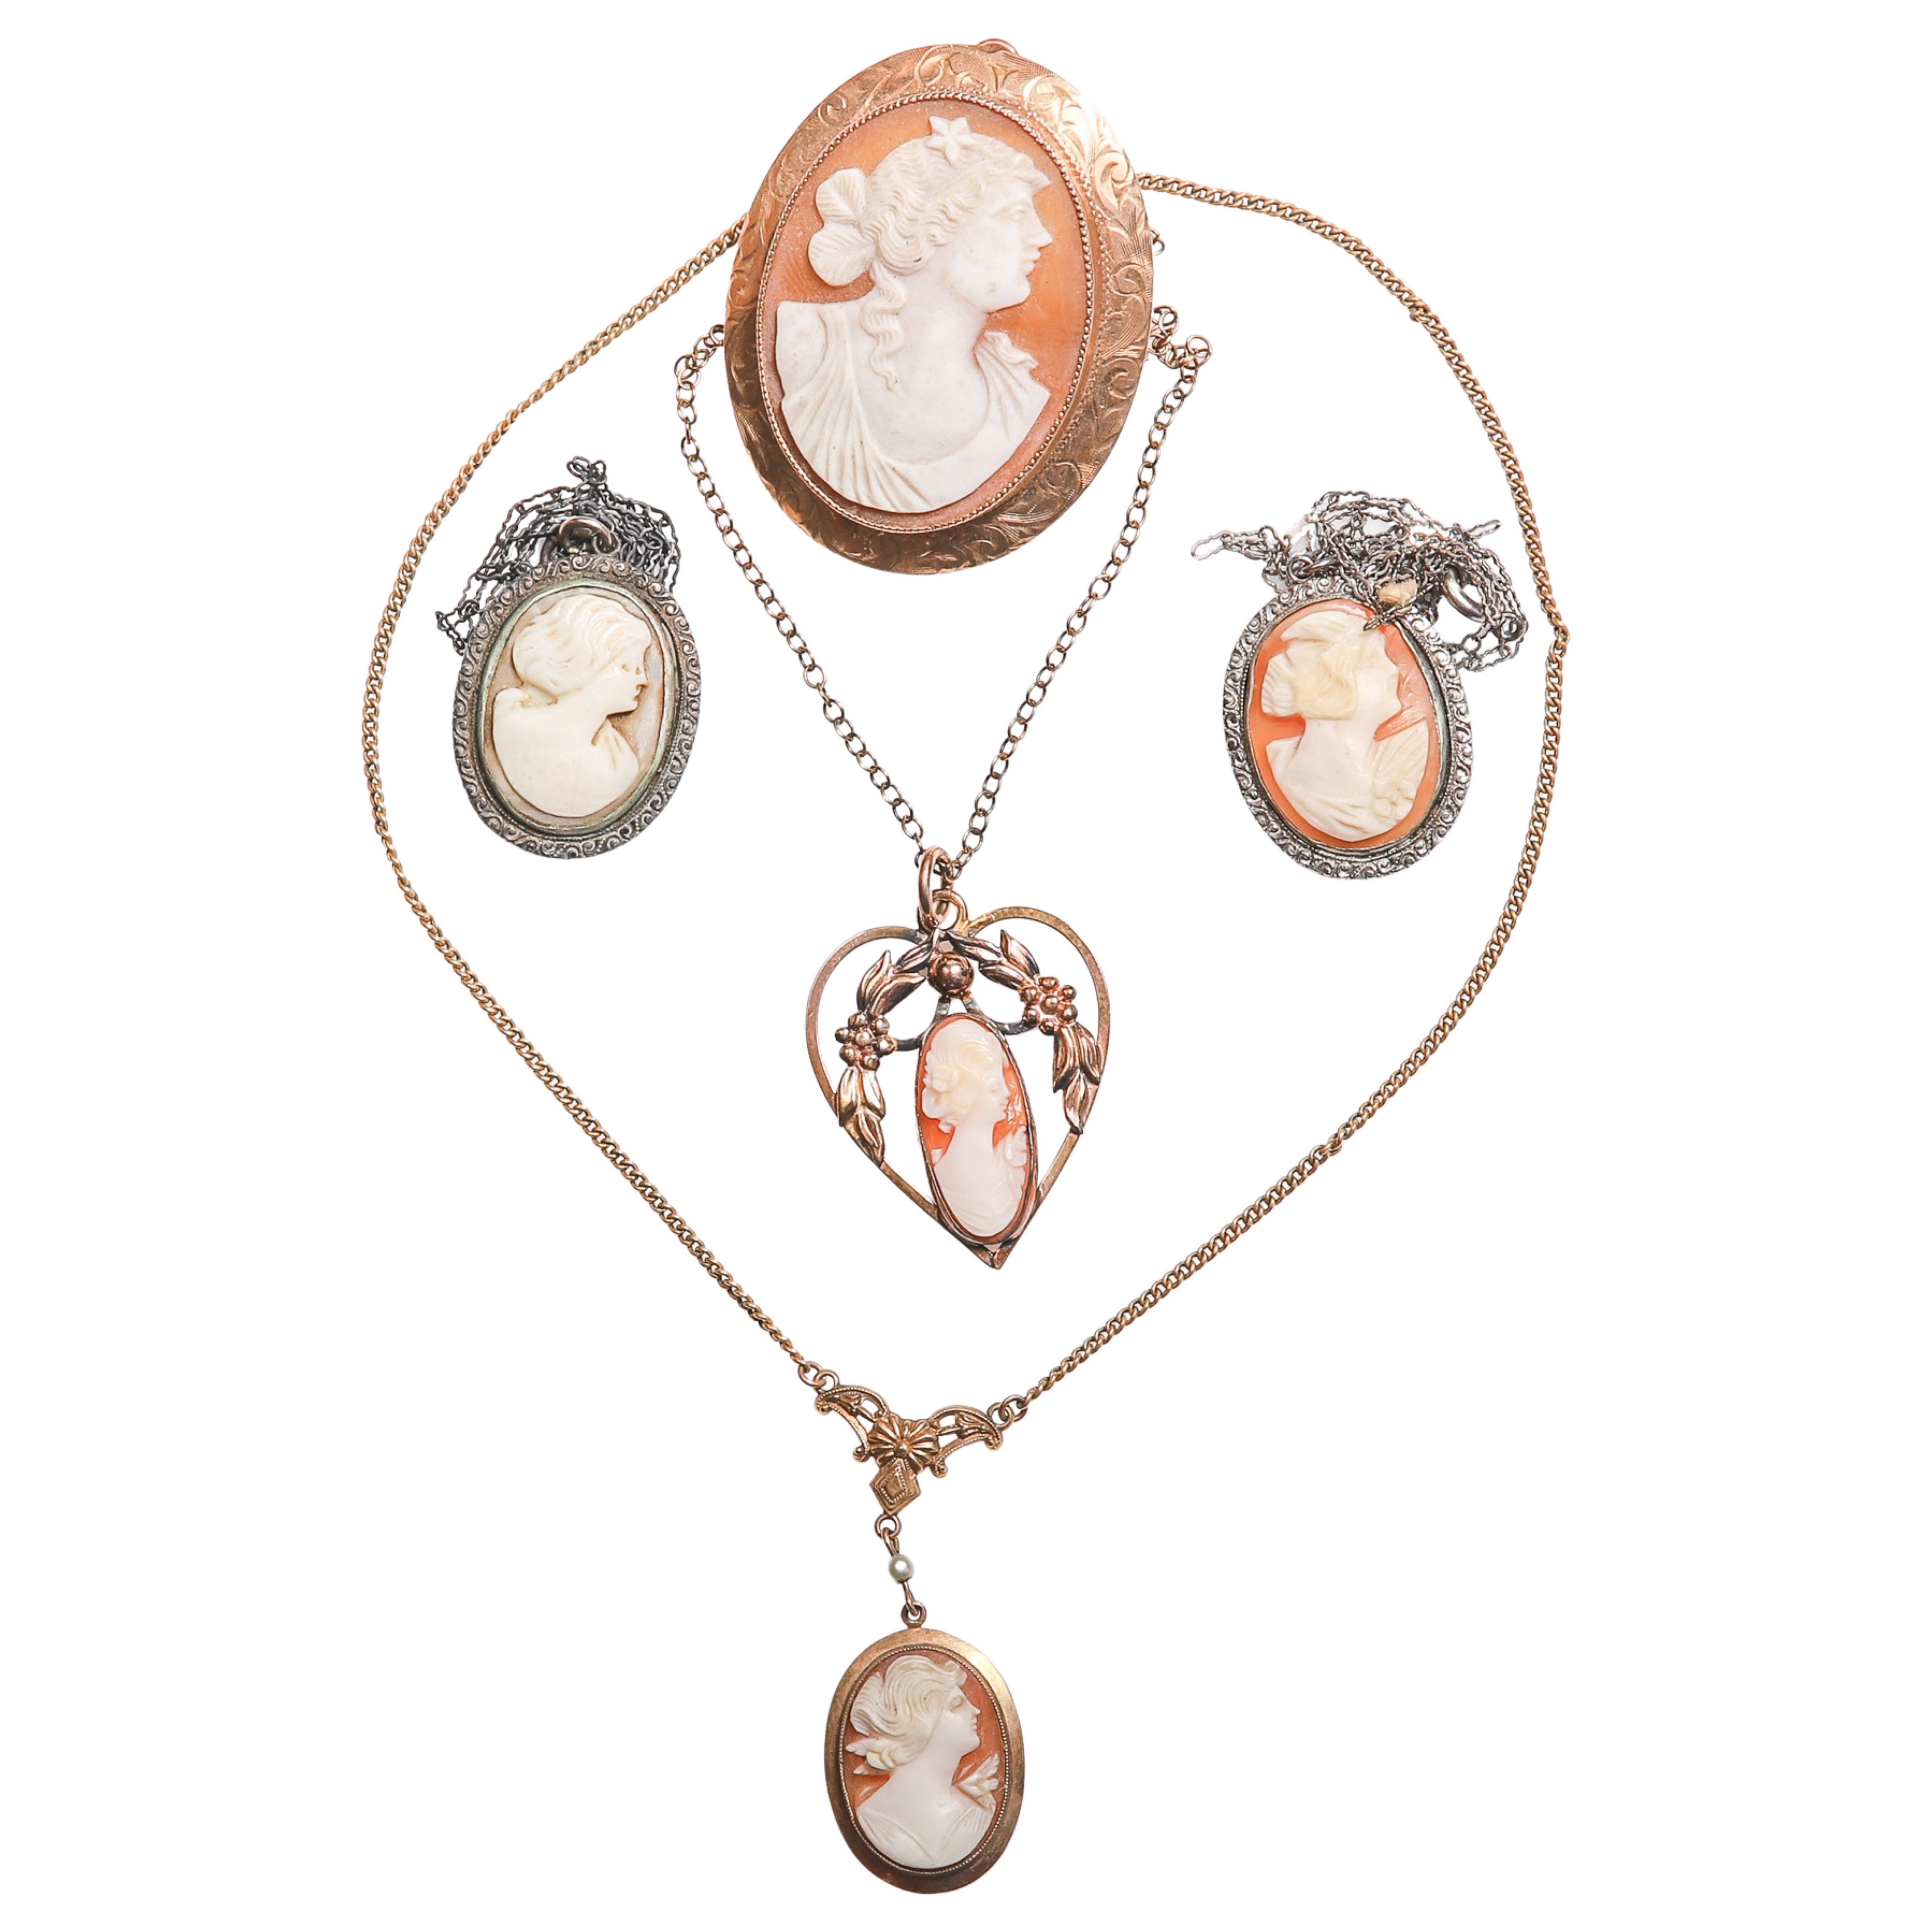  5 Cameo necklaces and pin to 30fedc